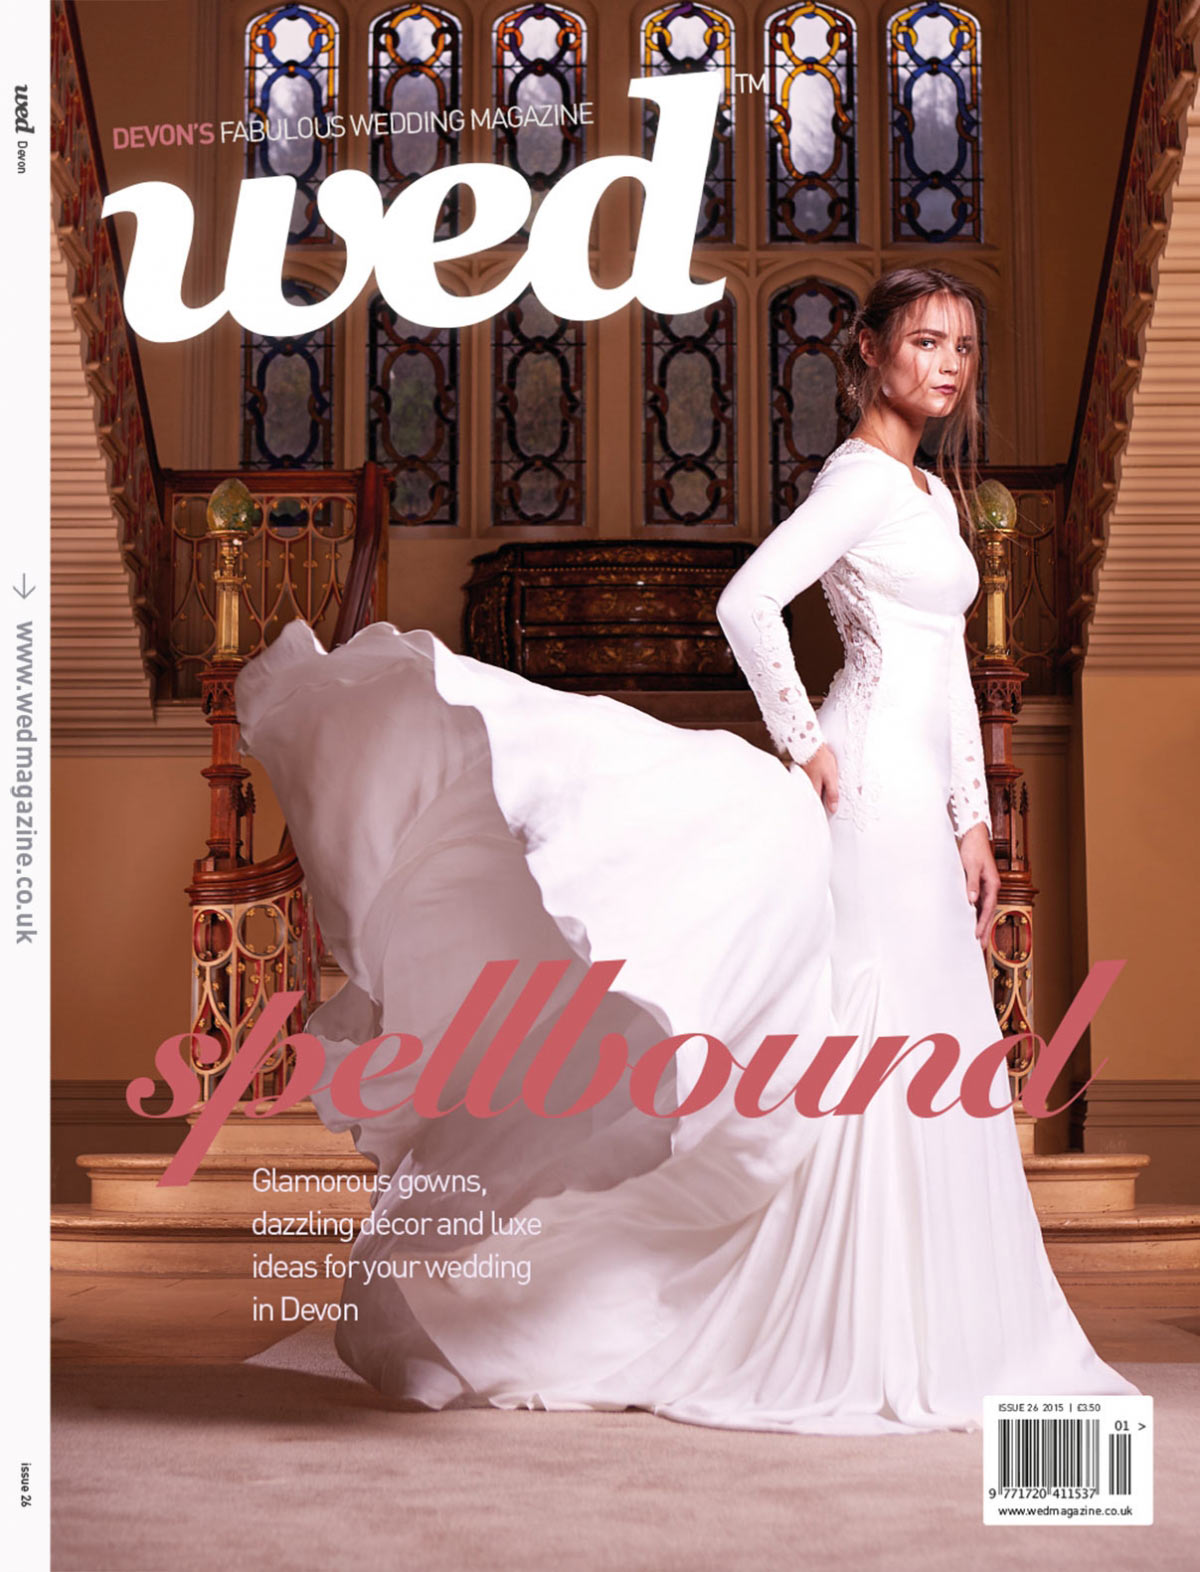 New Devon Wed out now!